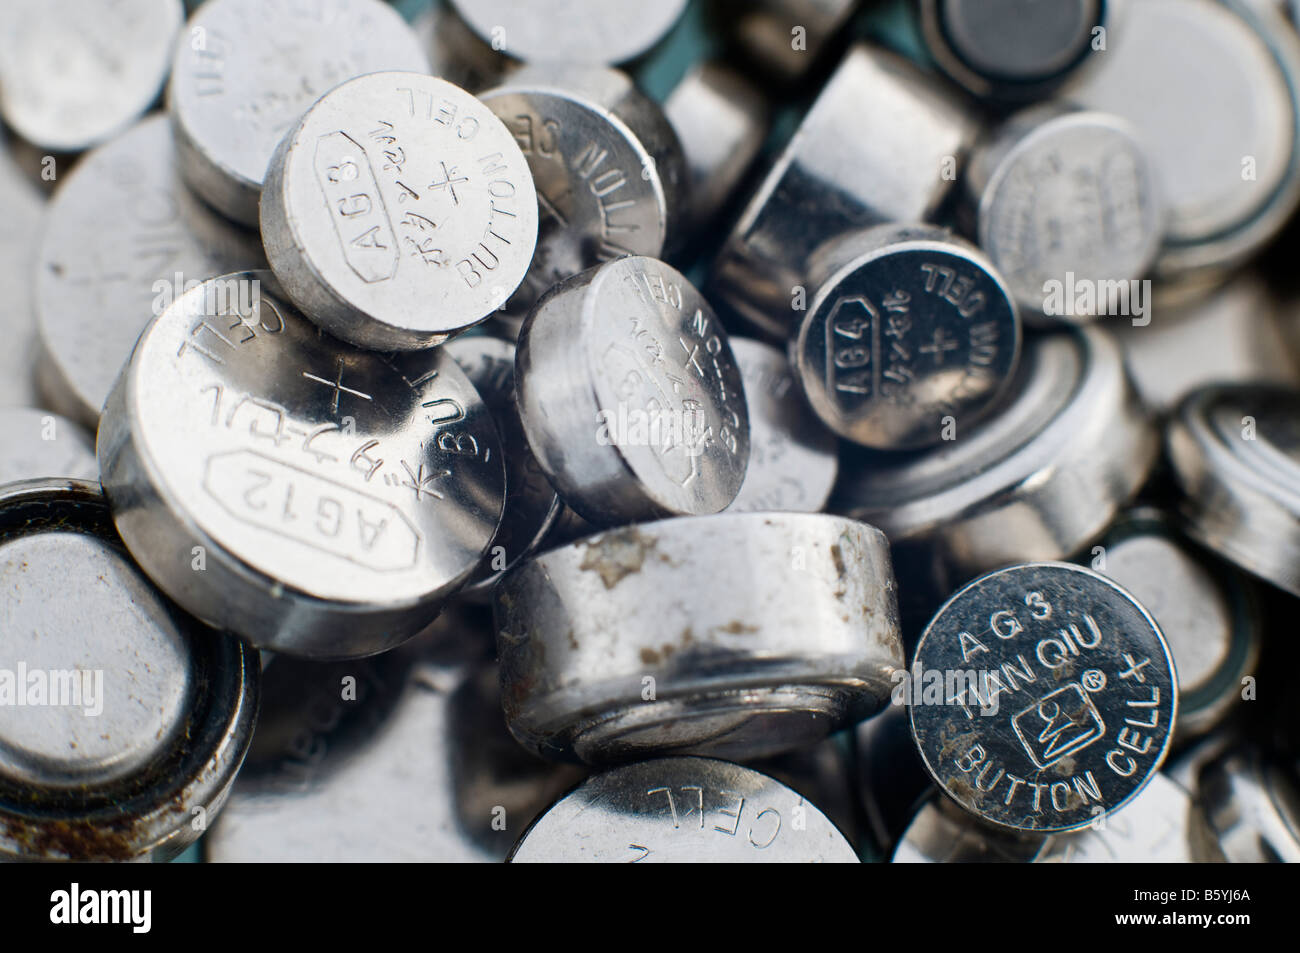 Pile of button cells (watch batteries) Stock Photo